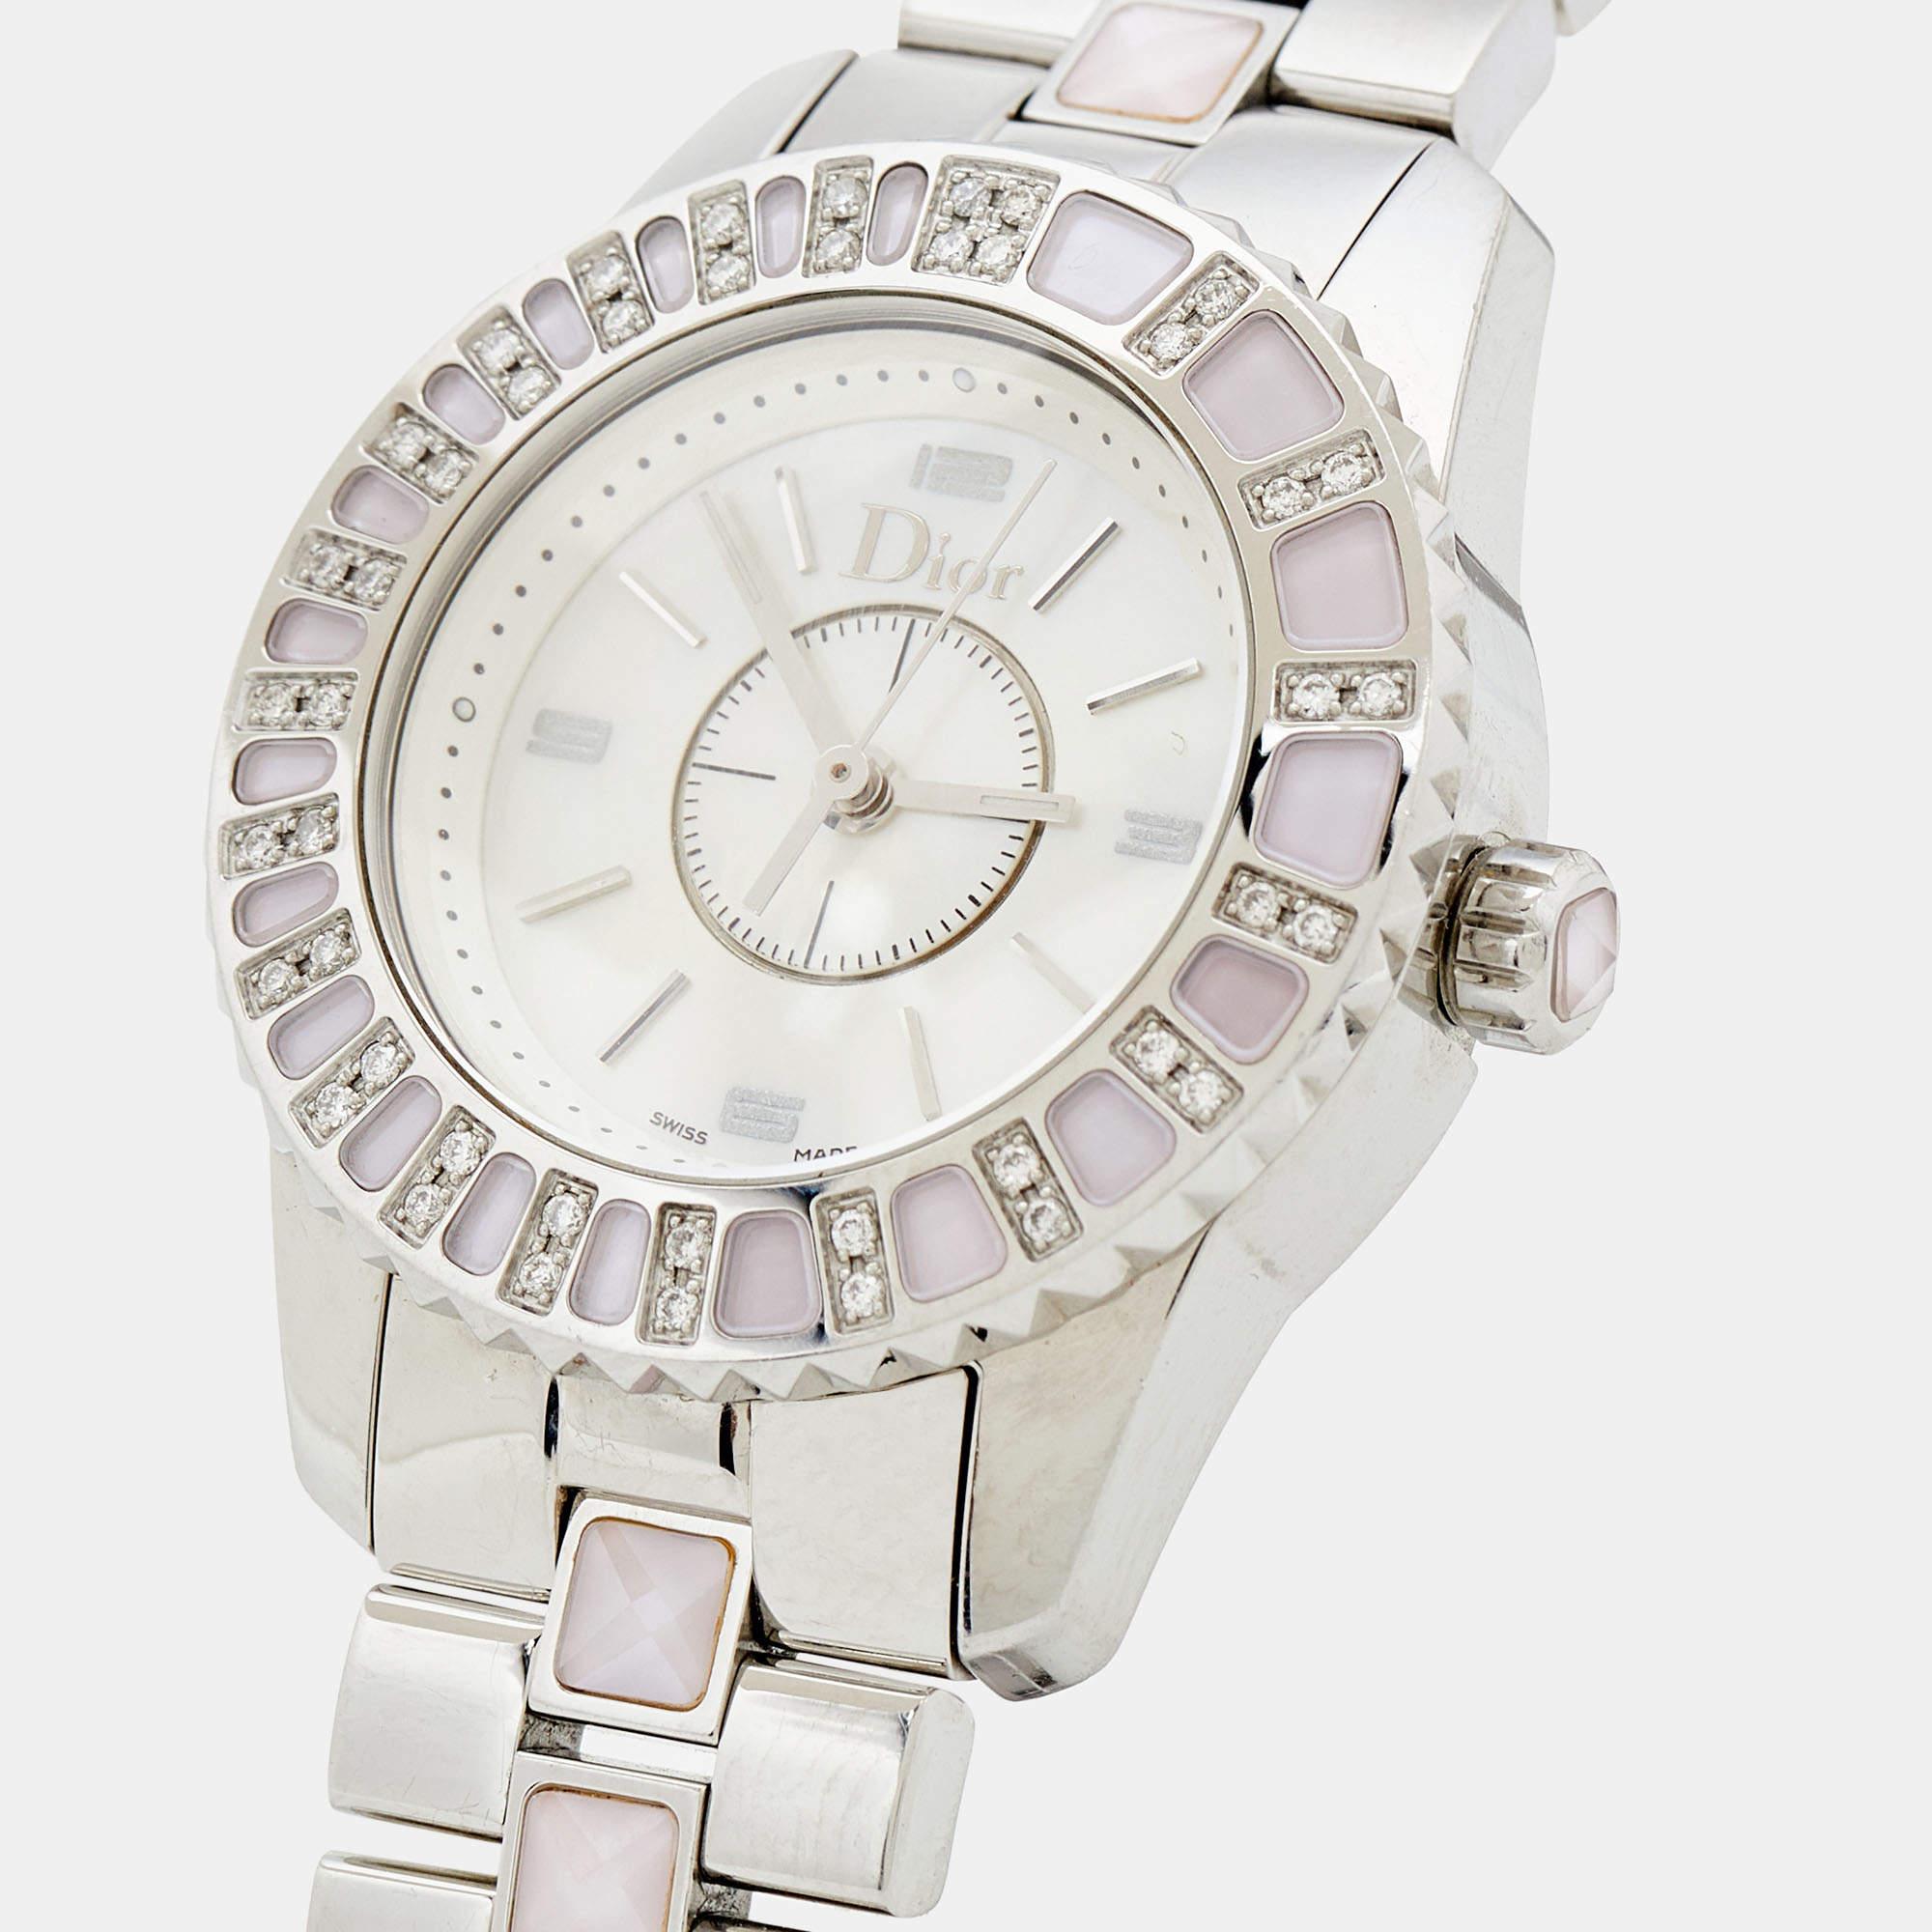 dior mother of pearl watch